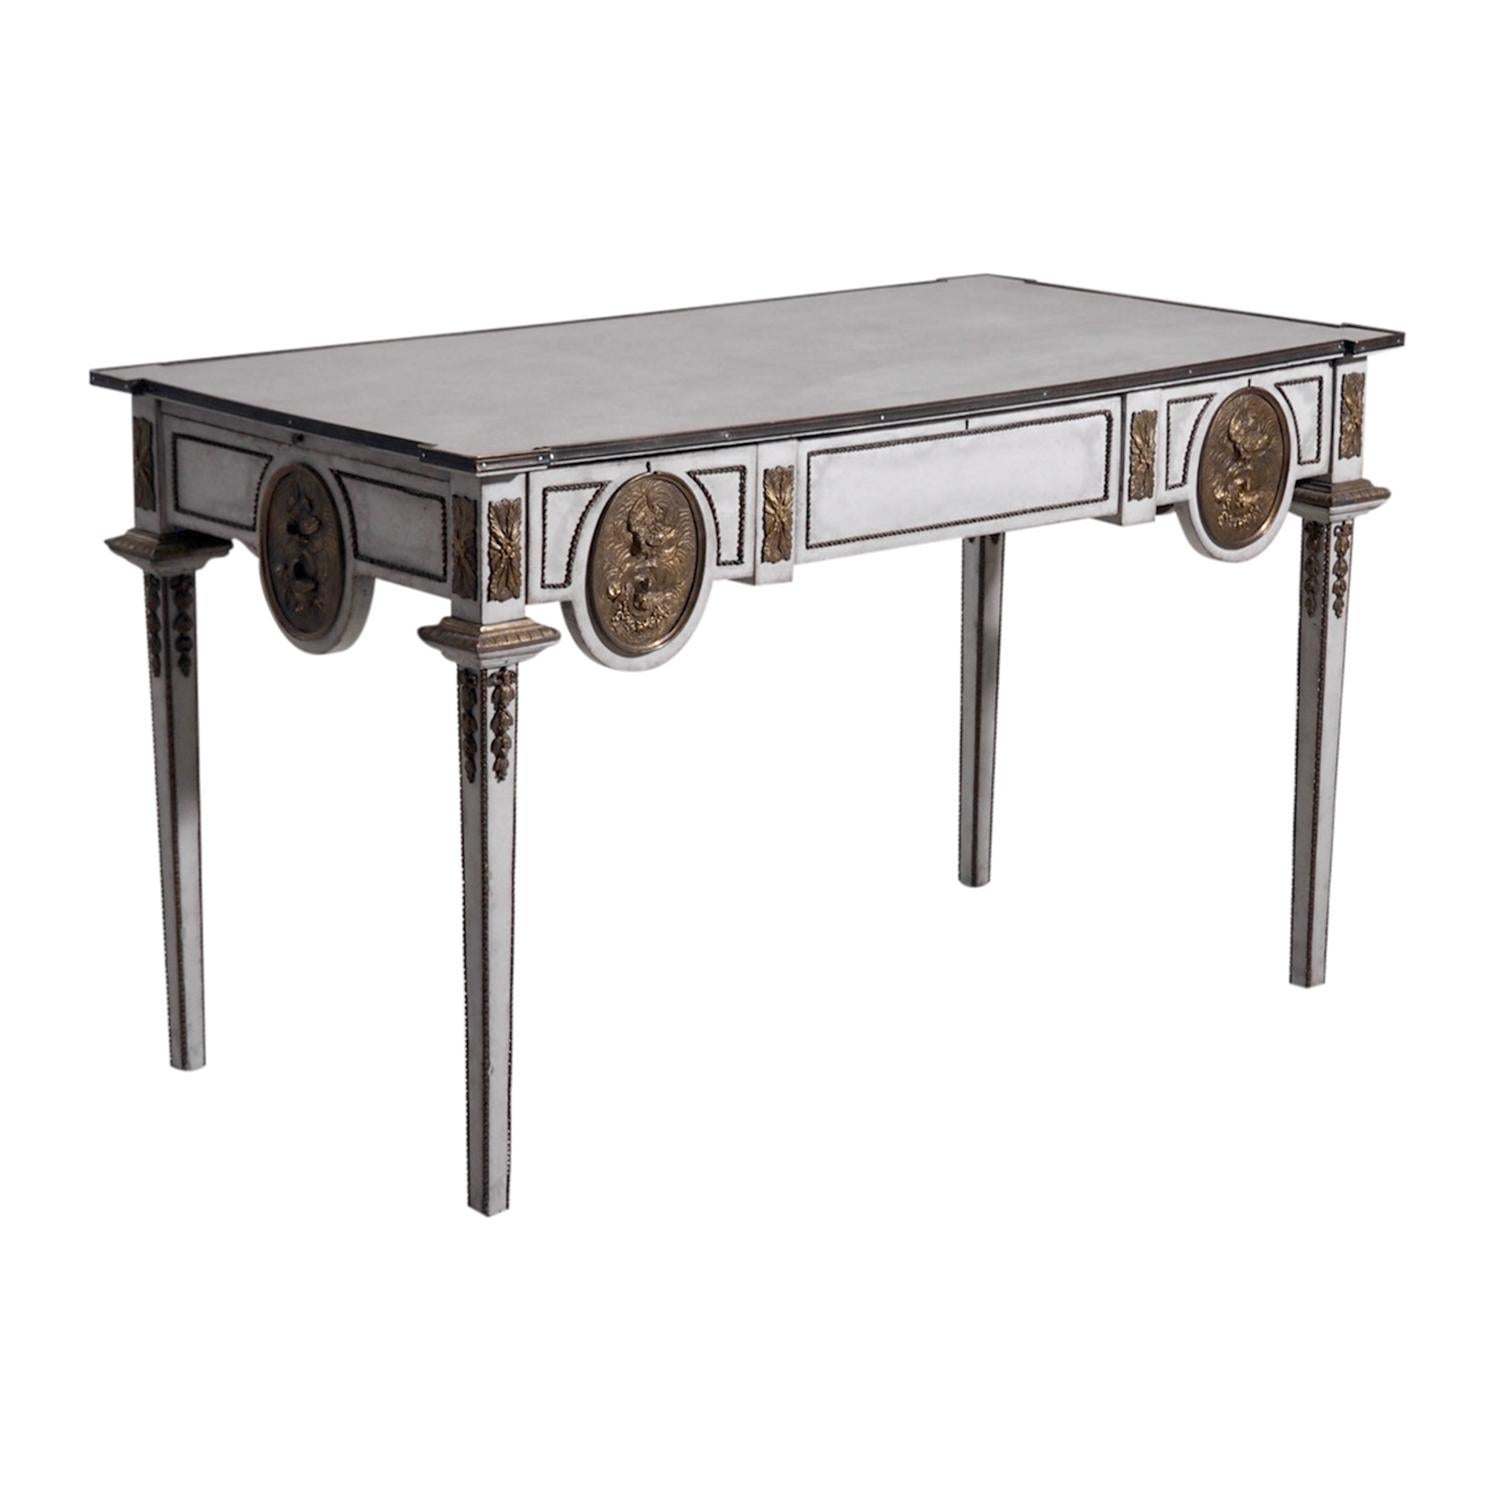 An extendable, antique French partners desk with a white, grey rectangular top, made of hand carved oakwood, in good condition. The writing table is standing on four straight legs, composed with two drawers and one key, very detailed bronze, brass